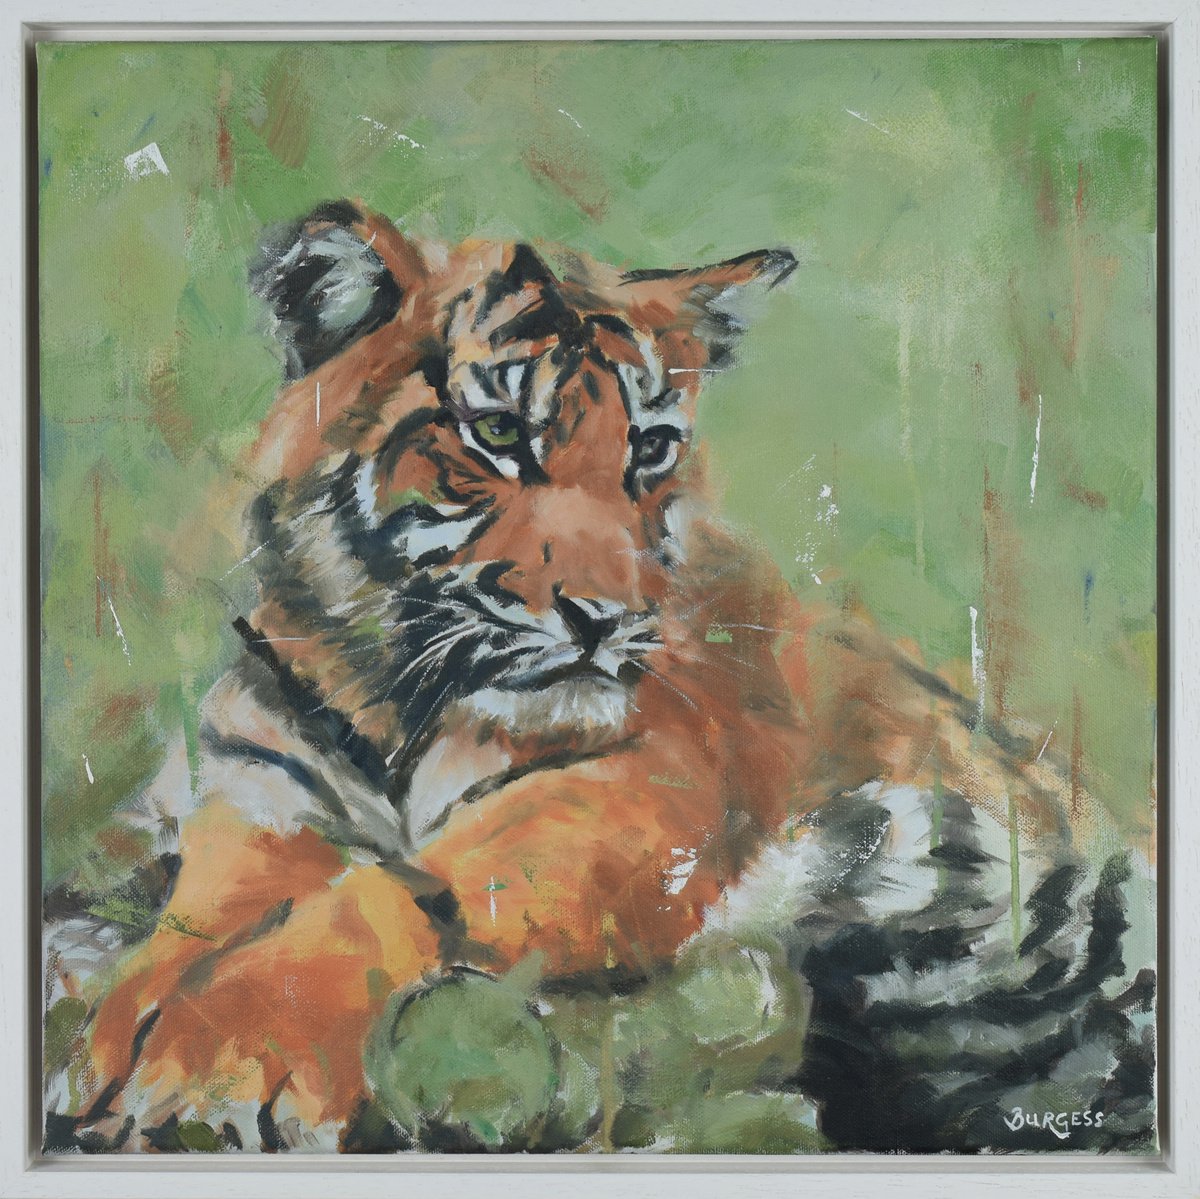 Rajah - Framed Tiger Wildlife Oil Painting On Canvas by Shaun Burgess